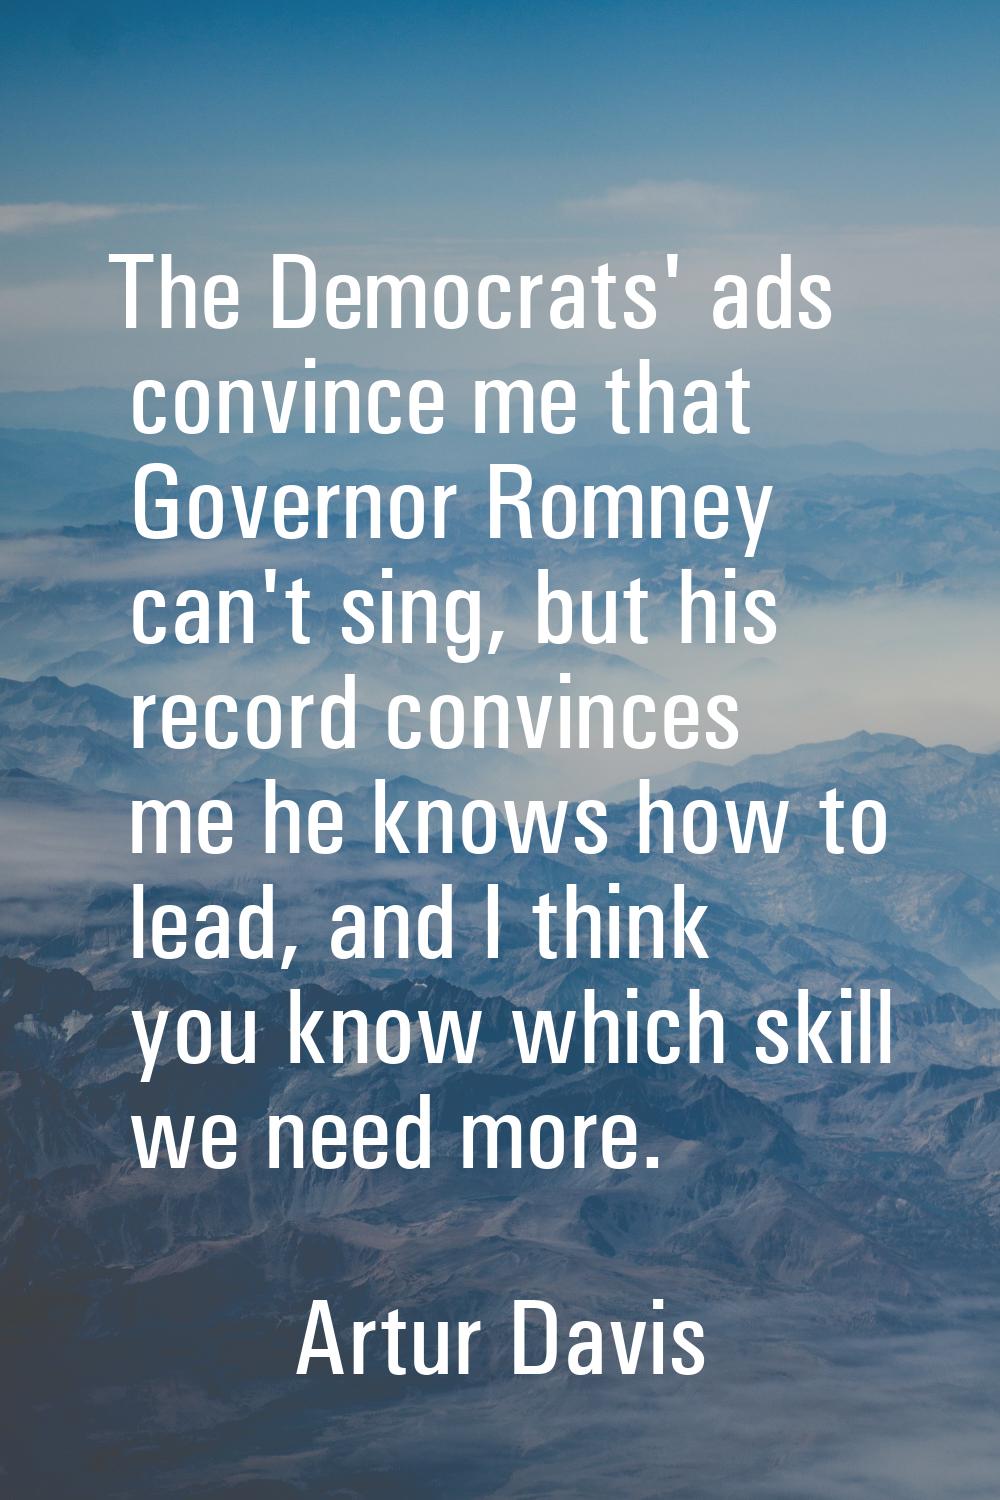 The Democrats' ads convince me that Governor Romney can't sing, but his record convinces me he know